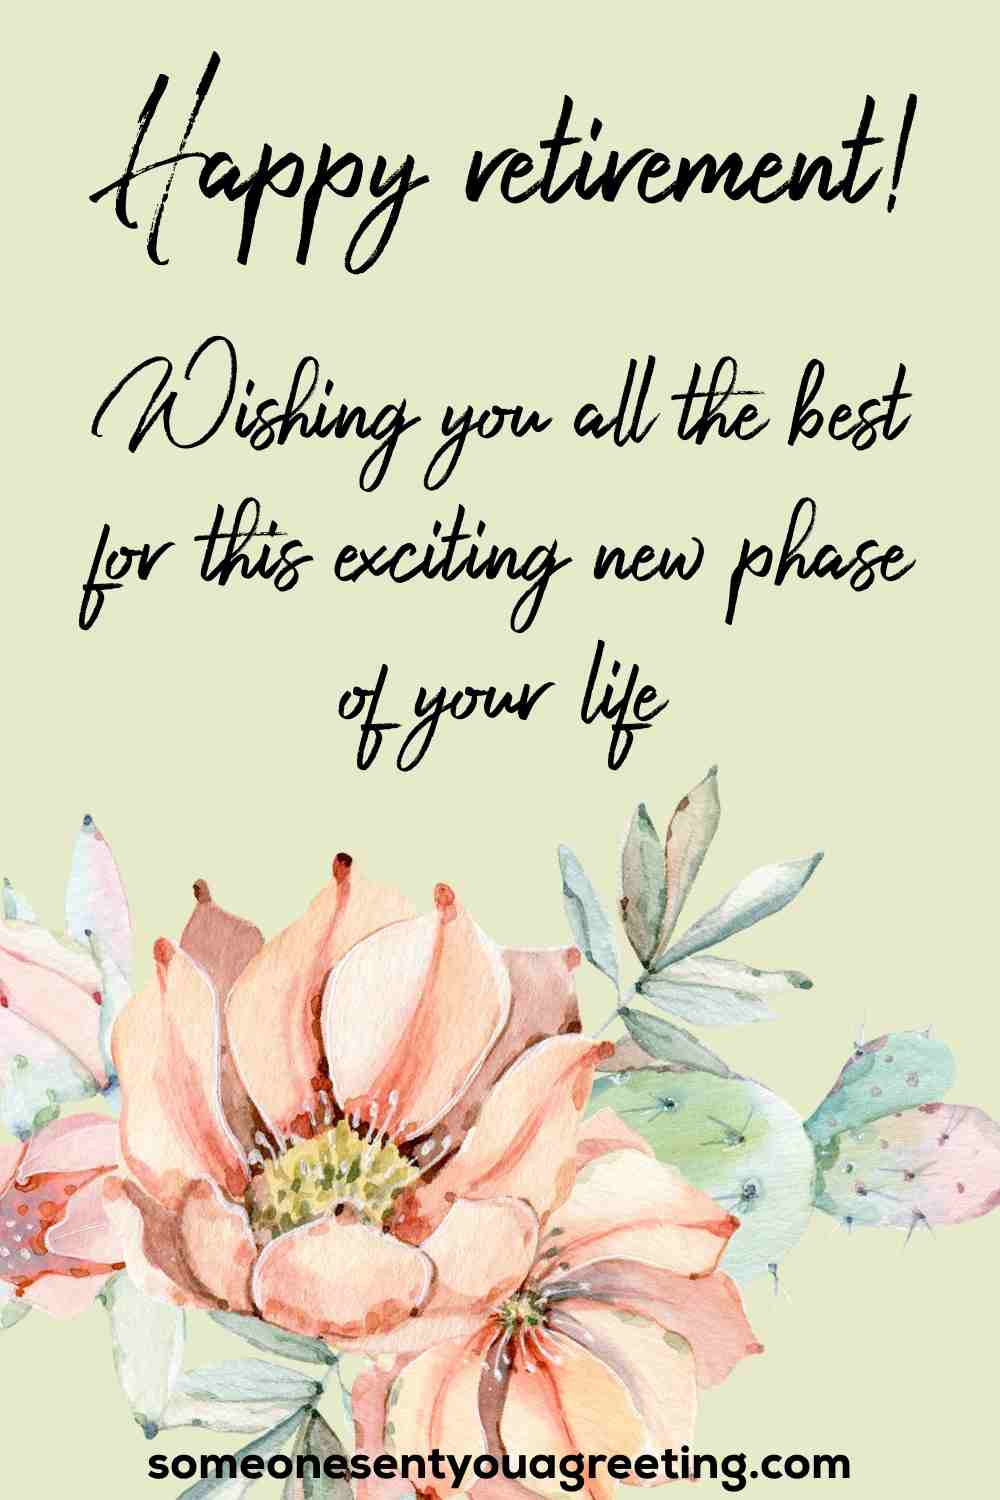 happy retirement wishes for exciting new phase of your life